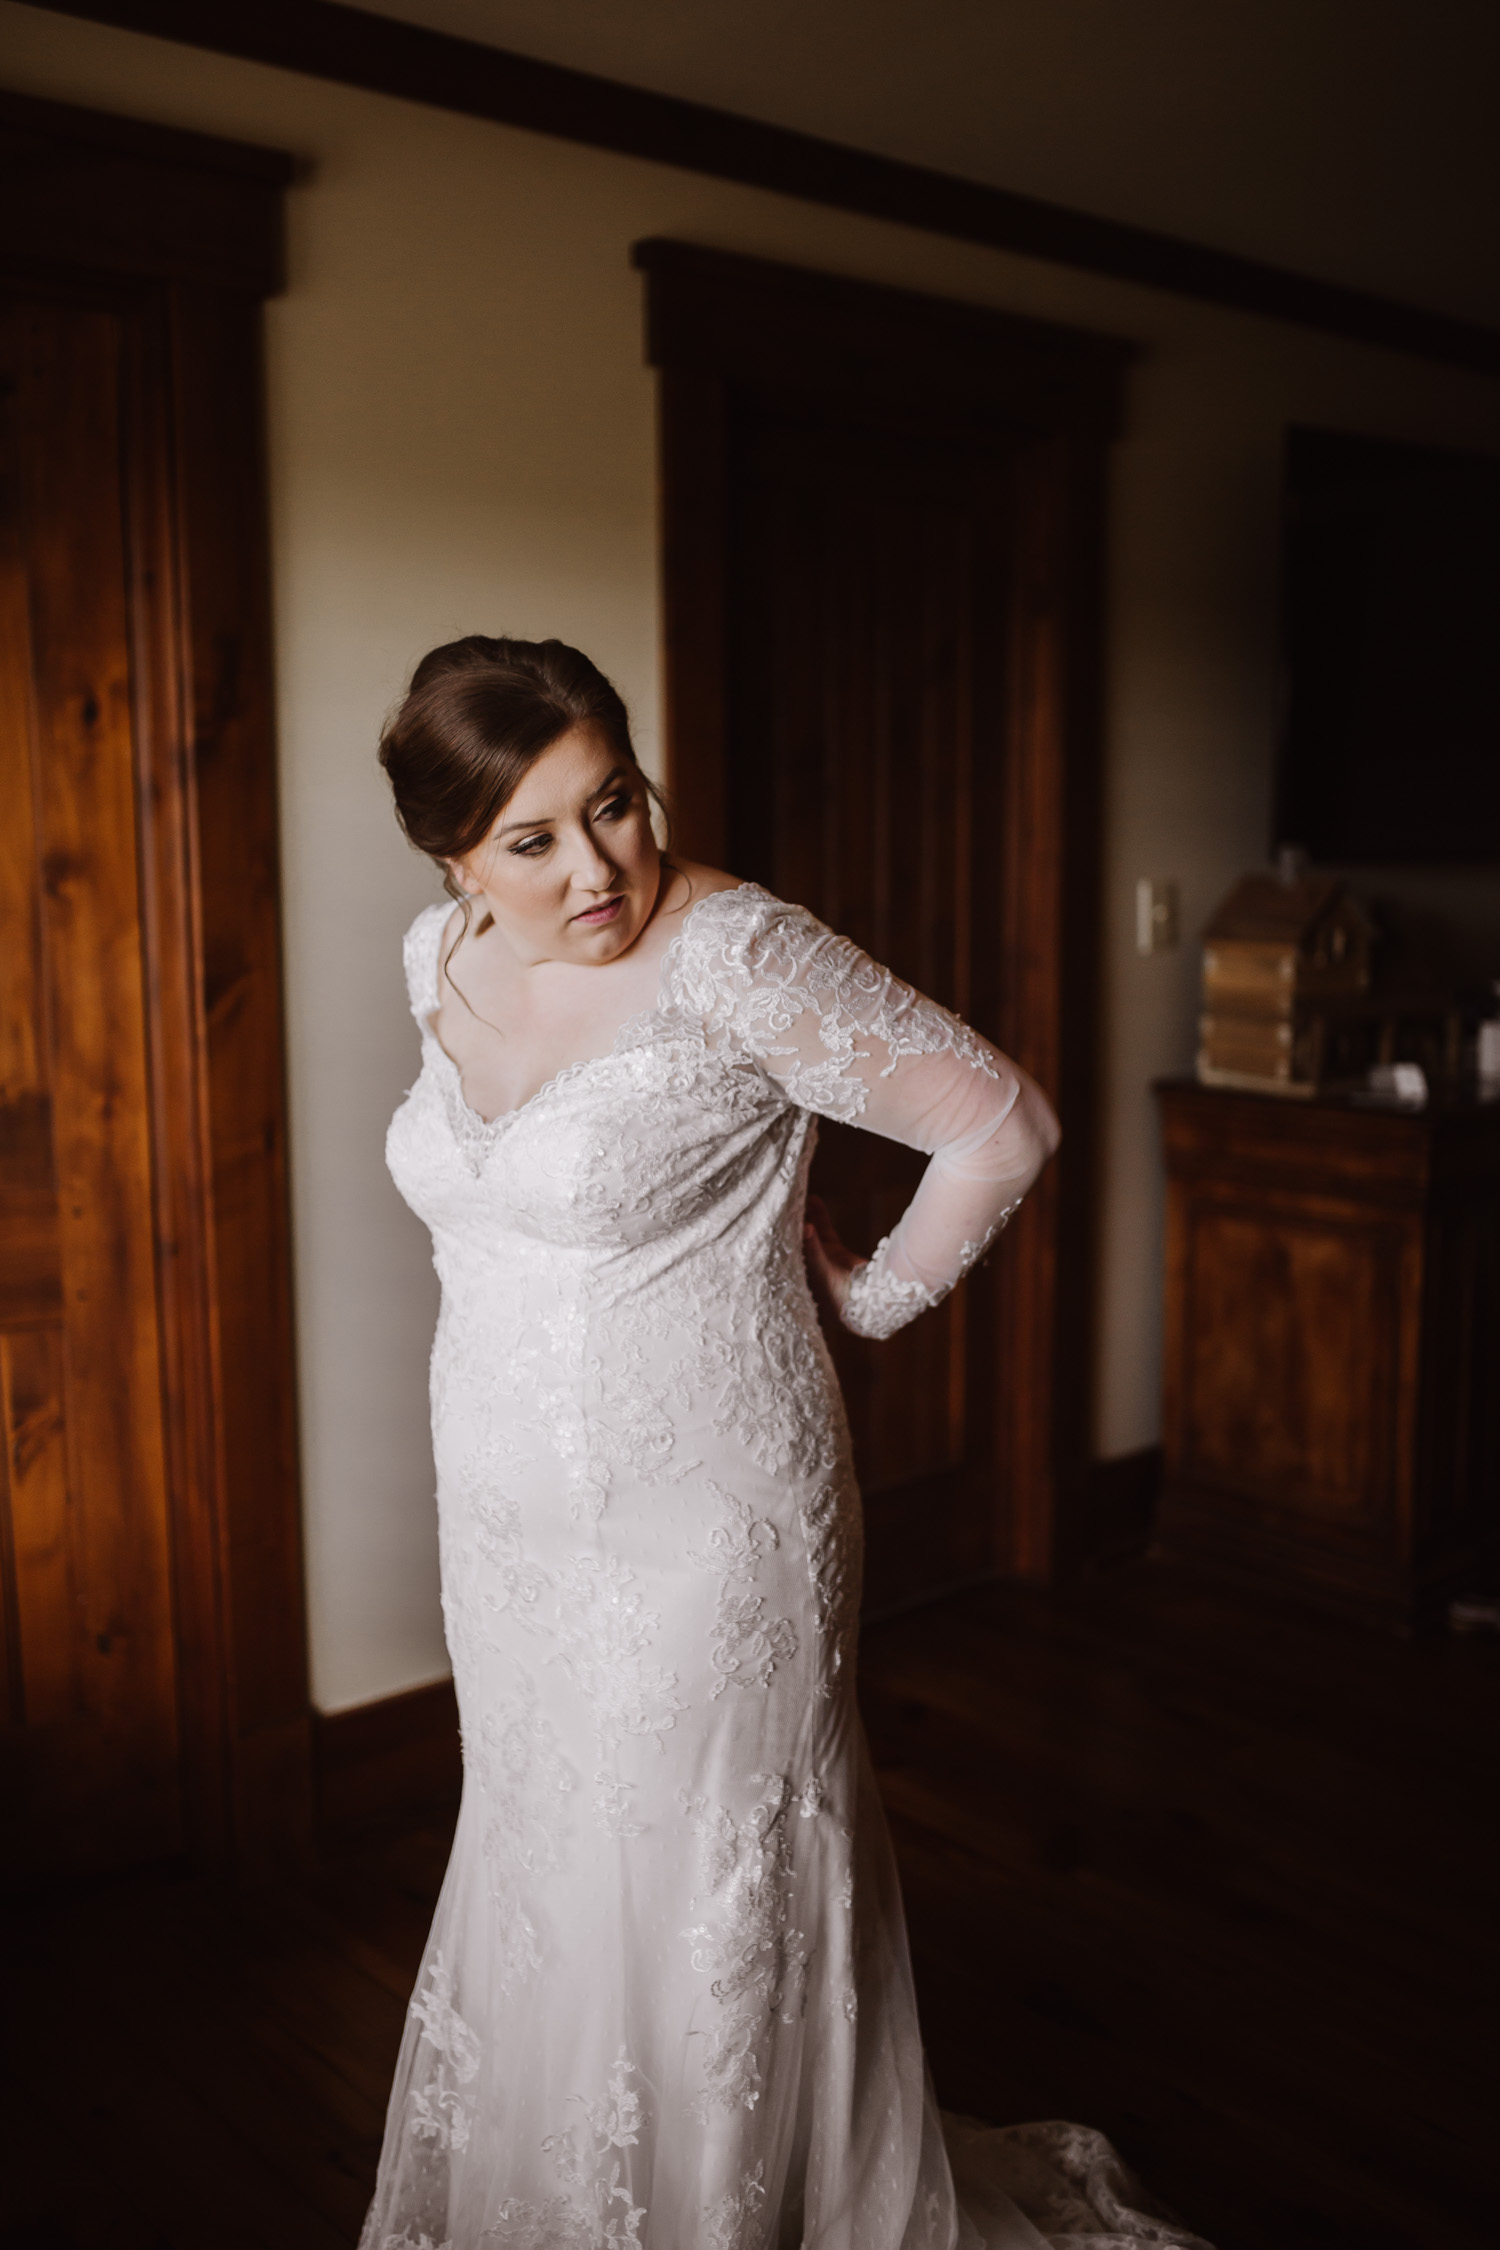 Classy, Southern, Country Wedding | wedding details and getting ready at Atkinson Farms in Danville, Virginia | Greensboro Winston-Salem, NC Wedding Photographer